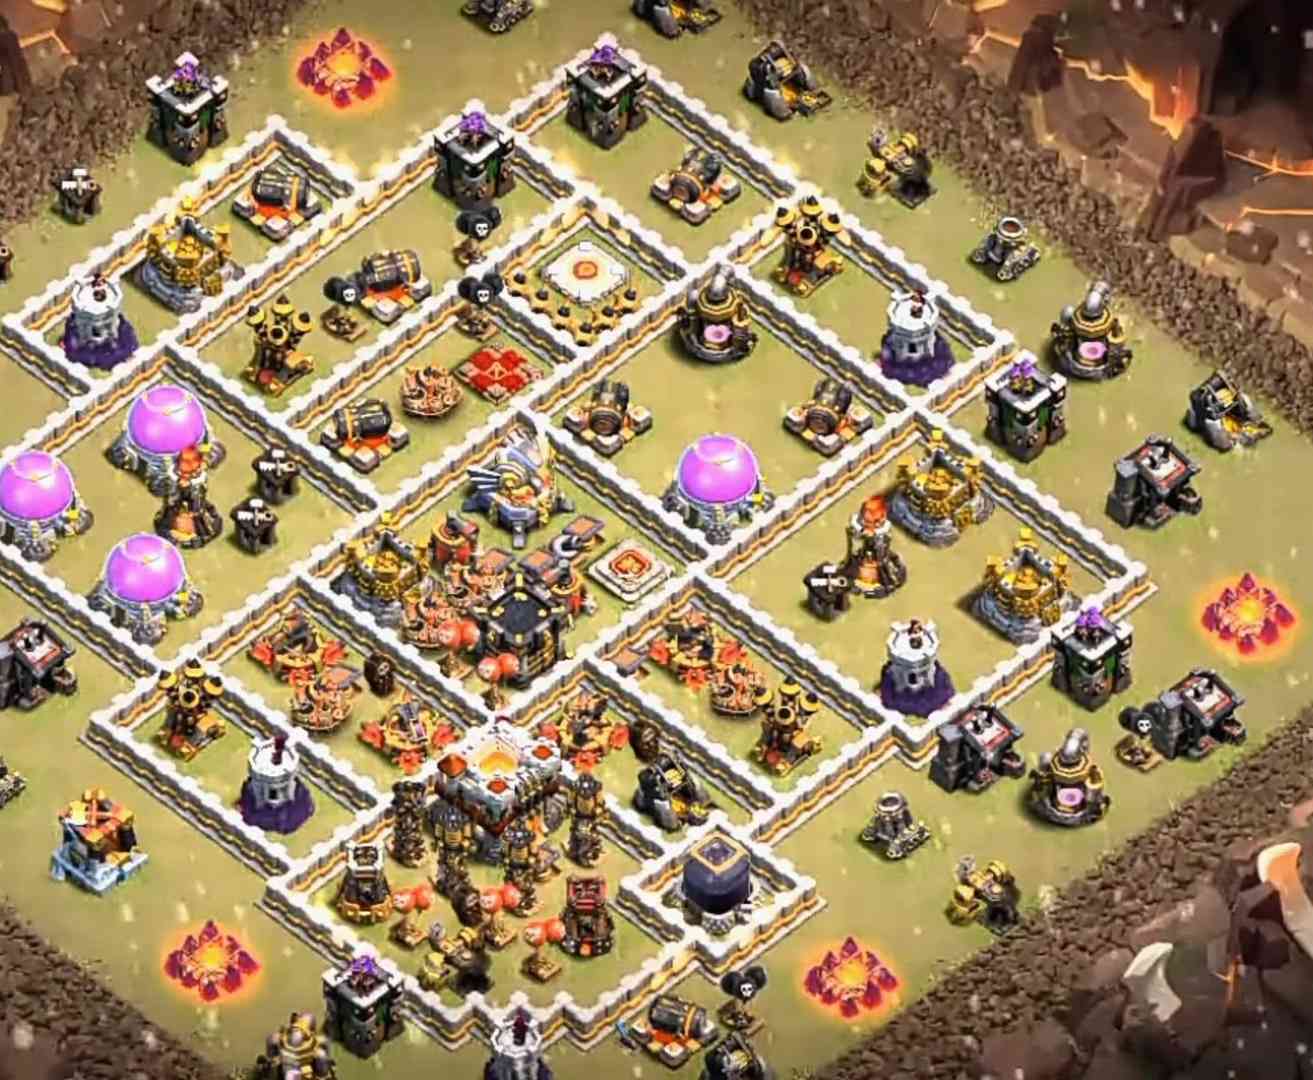 town hall 11 base copy link